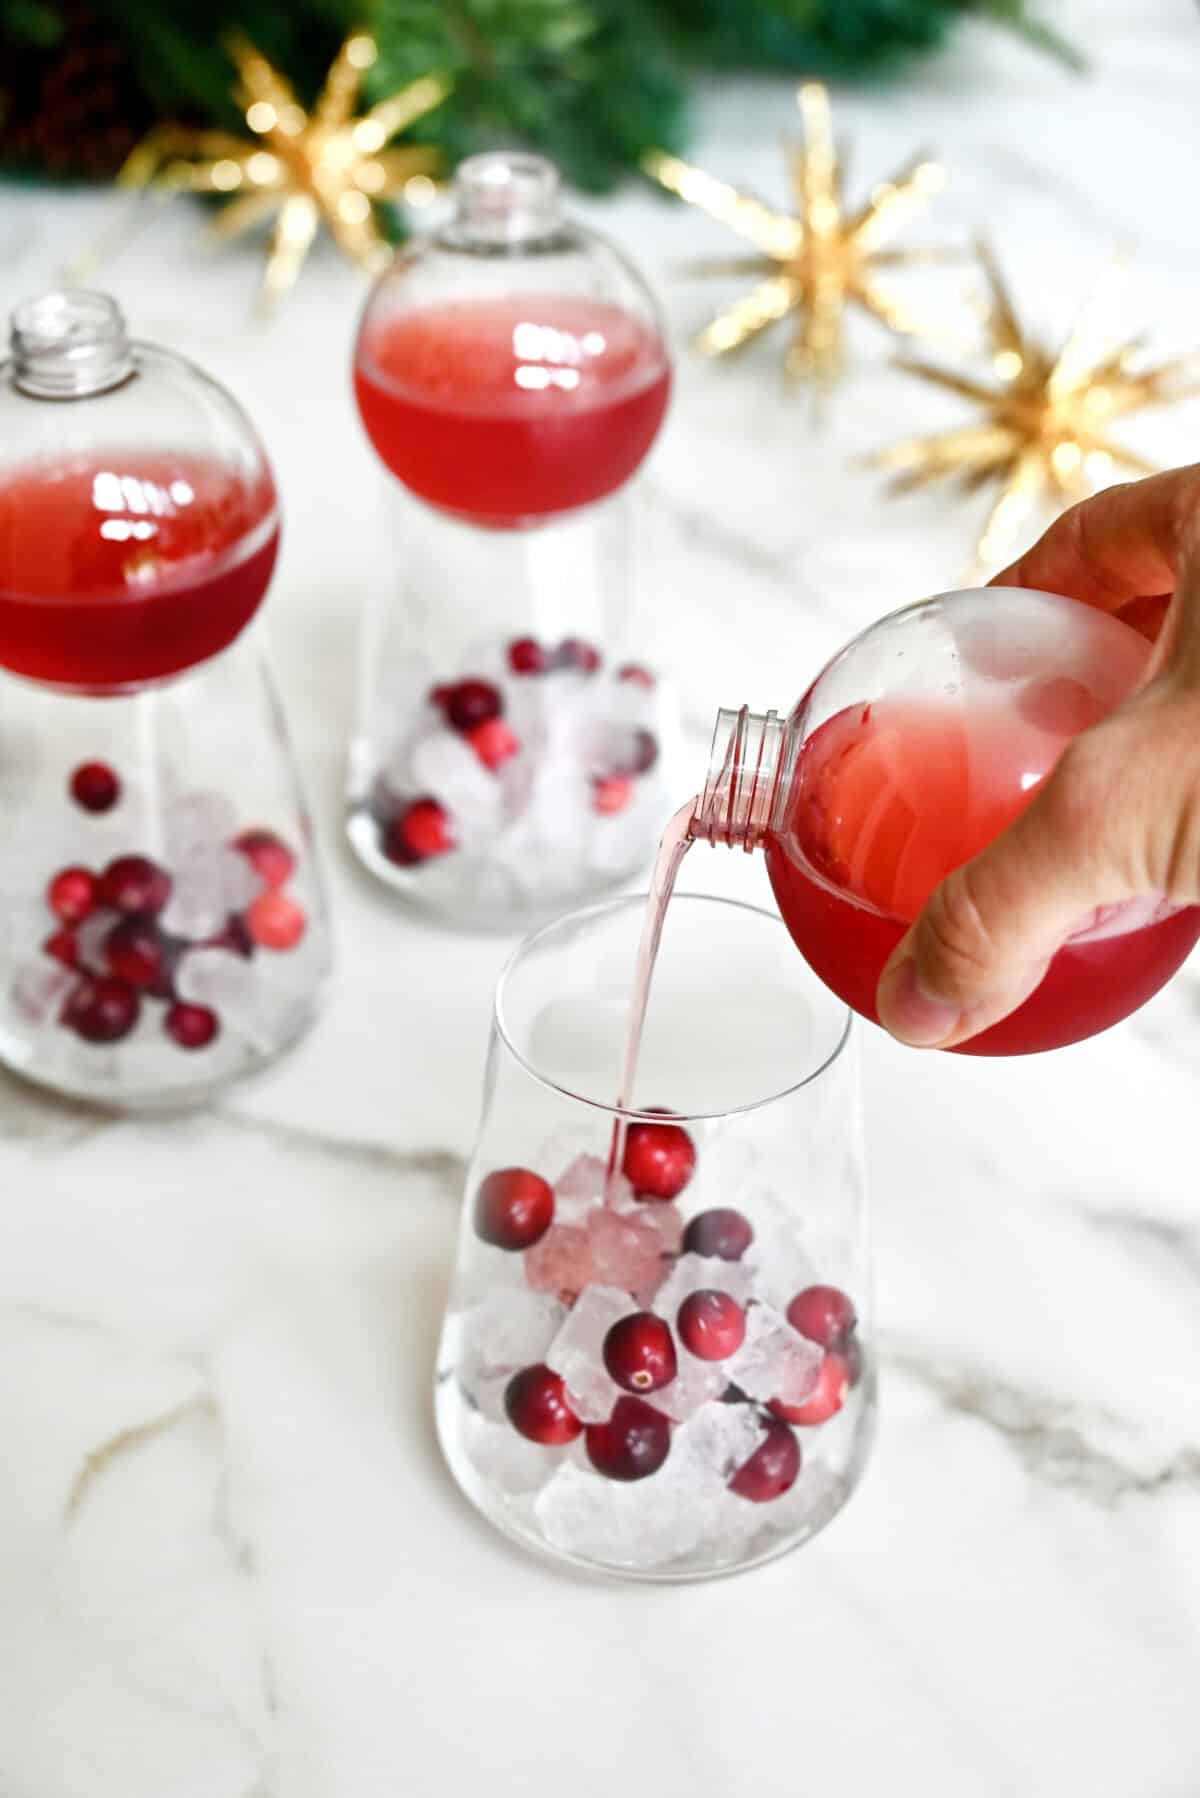 A hand holding a clear plastic ornament drinking ball pours Christmas margarita mix into a glass filled with ice and fresh cranberries.